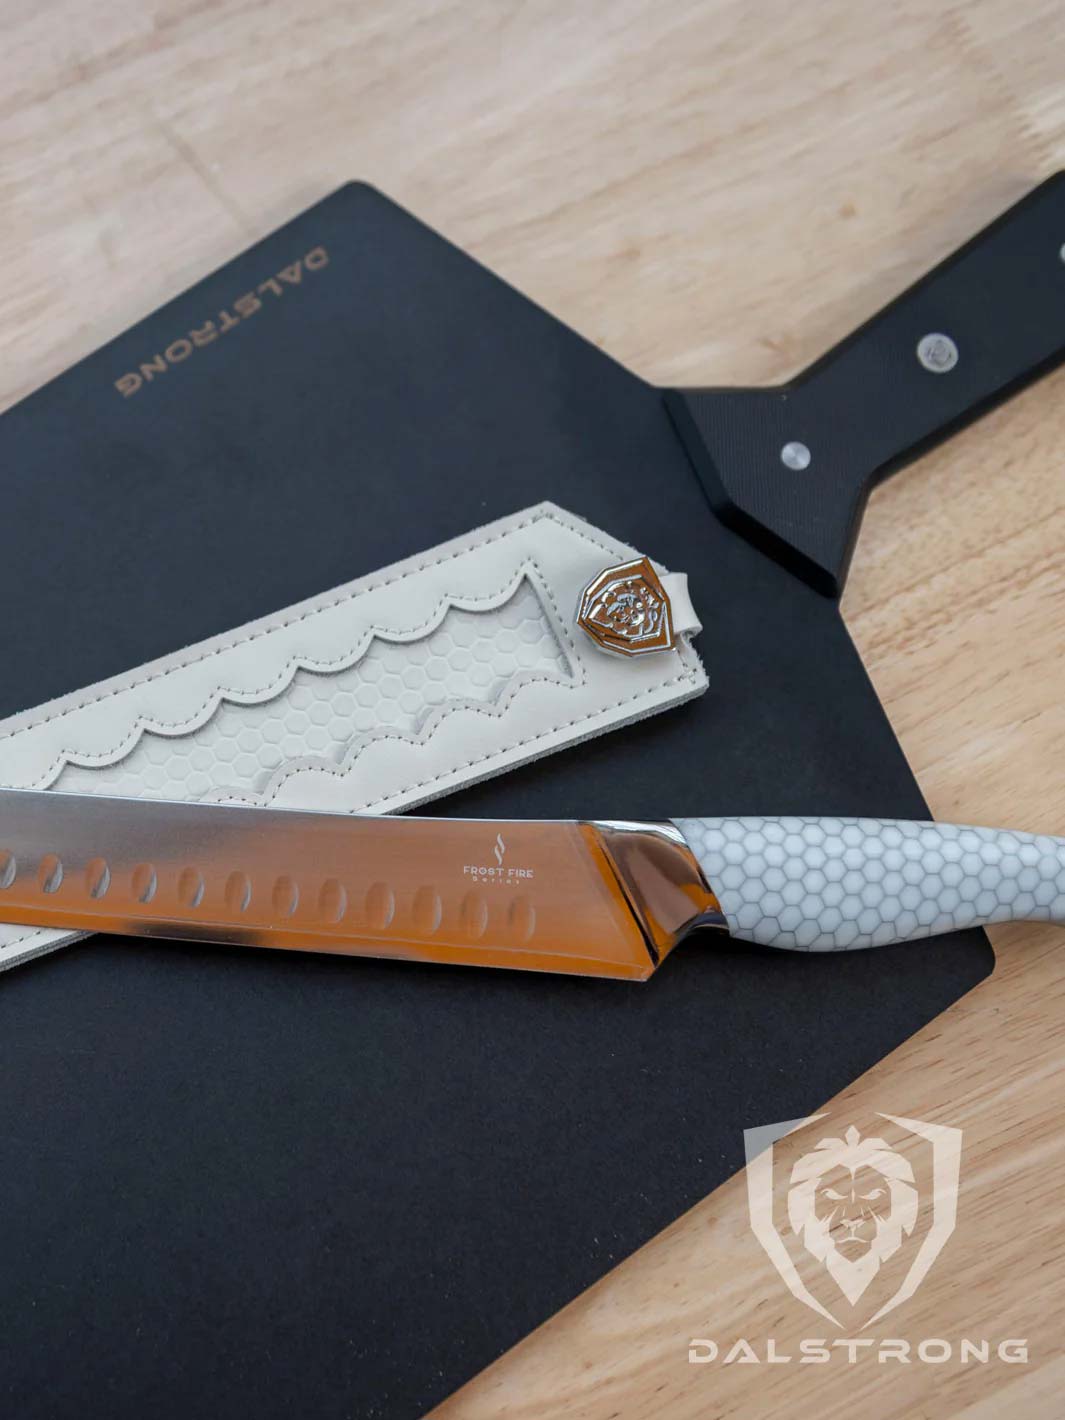 Dalstrong frost fire series 12 inch slicer knife with honeycomb handle and sheath on top of a cutting board.